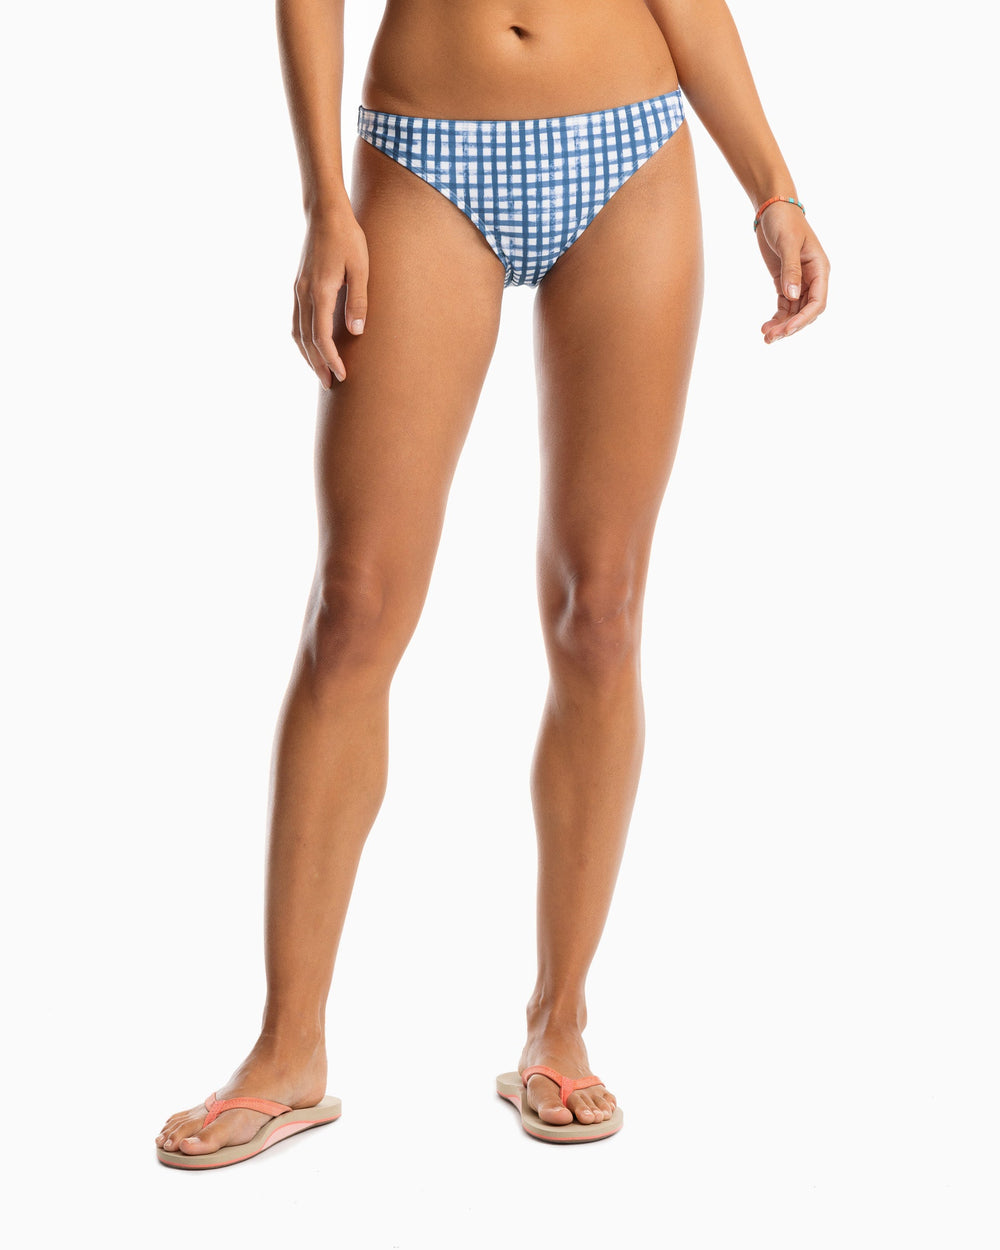 The front view of the Women's Bikini Bottom by Southern Tide - Seven Seas Blue Painted Gingham